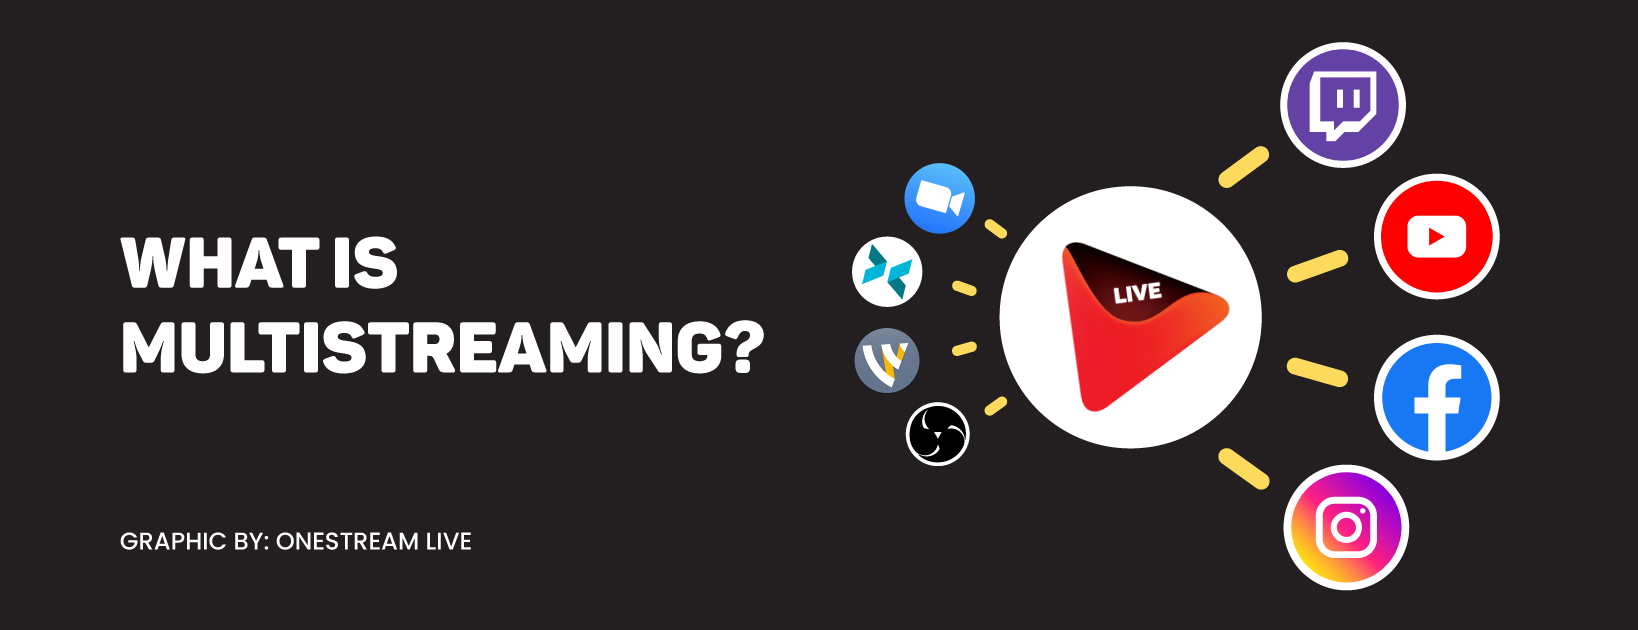 What is multistreaming